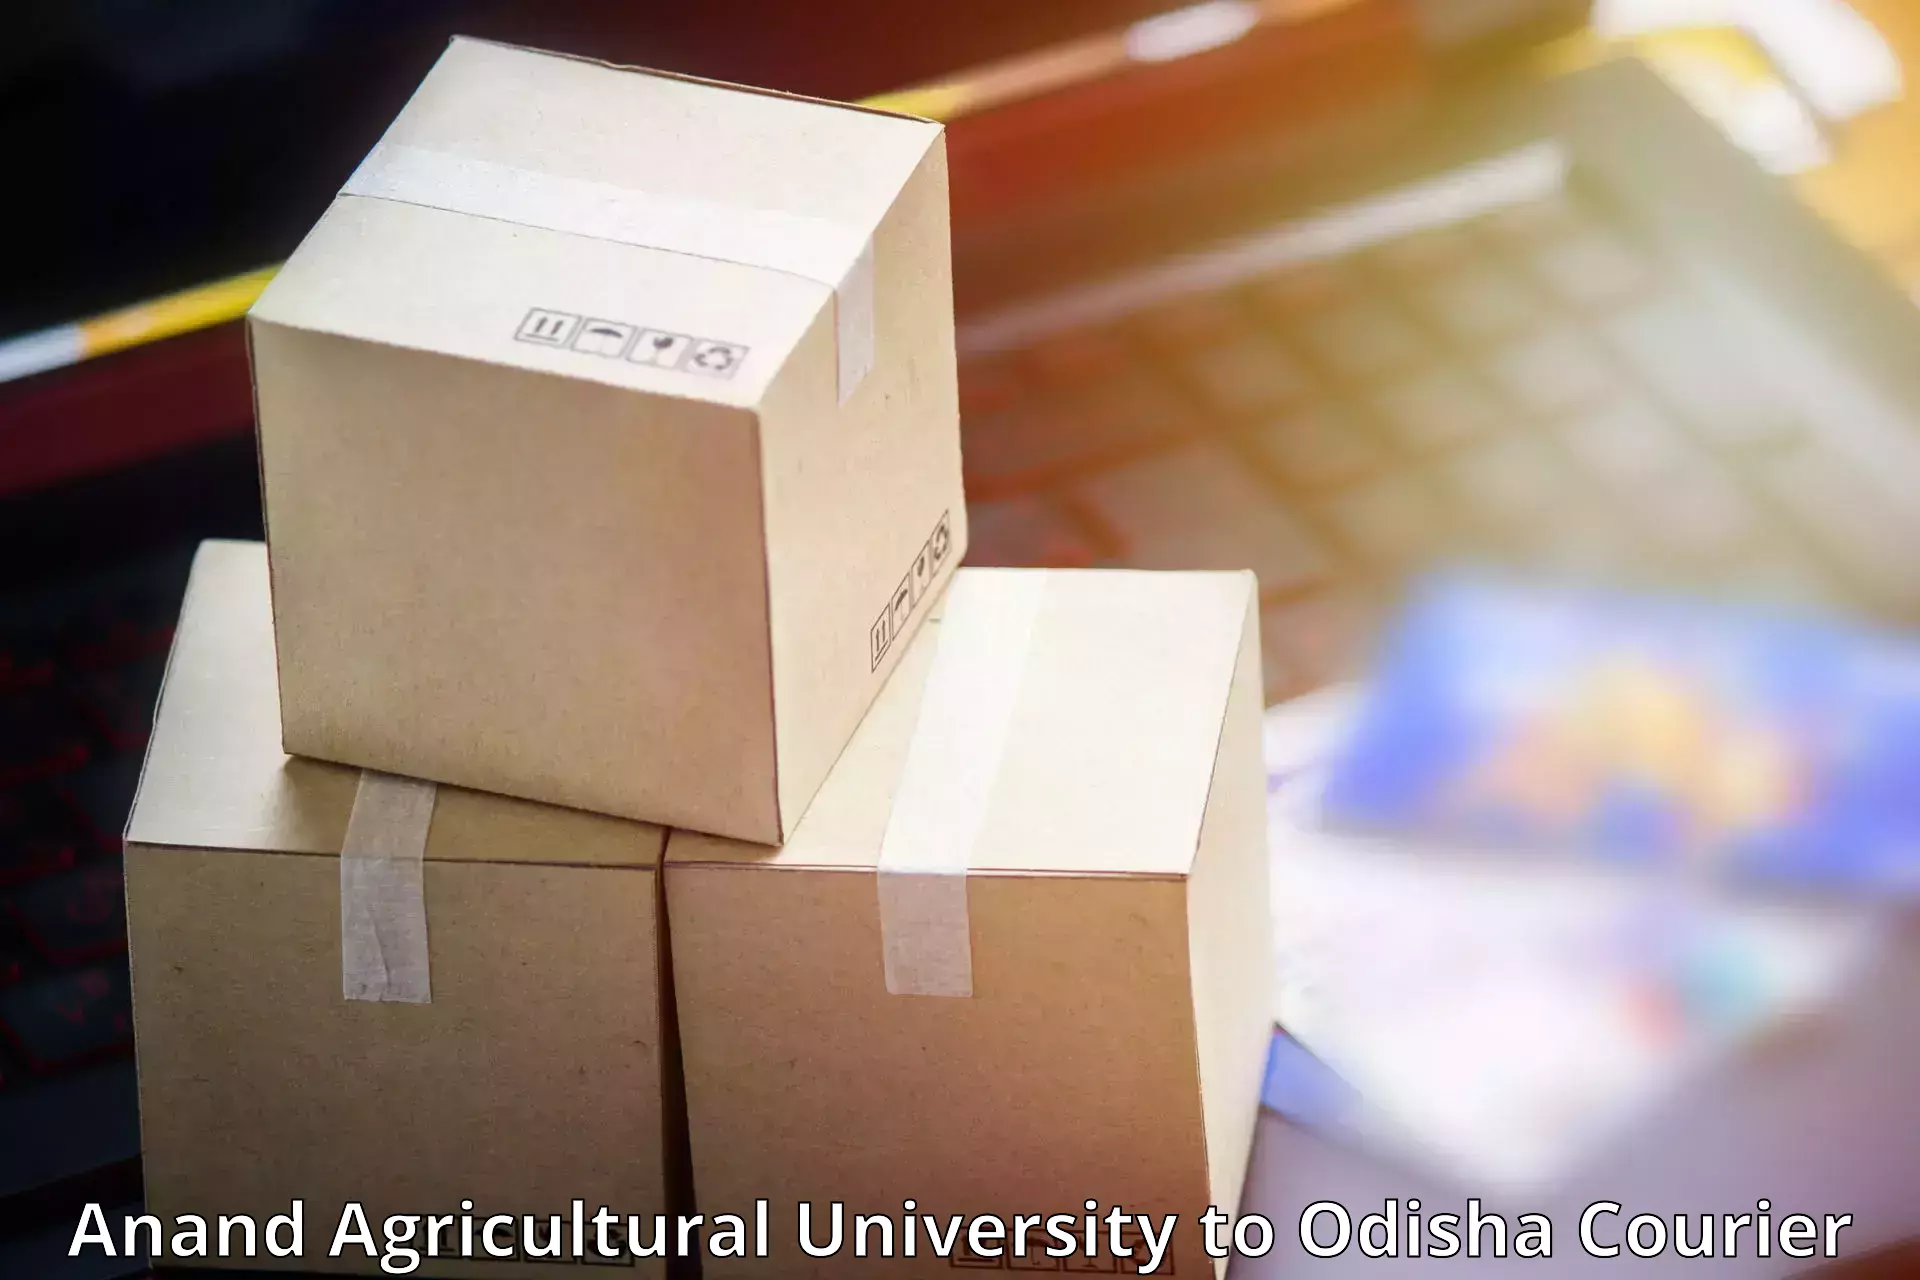 Holiday shipping services Anand Agricultural University to Nayagarh